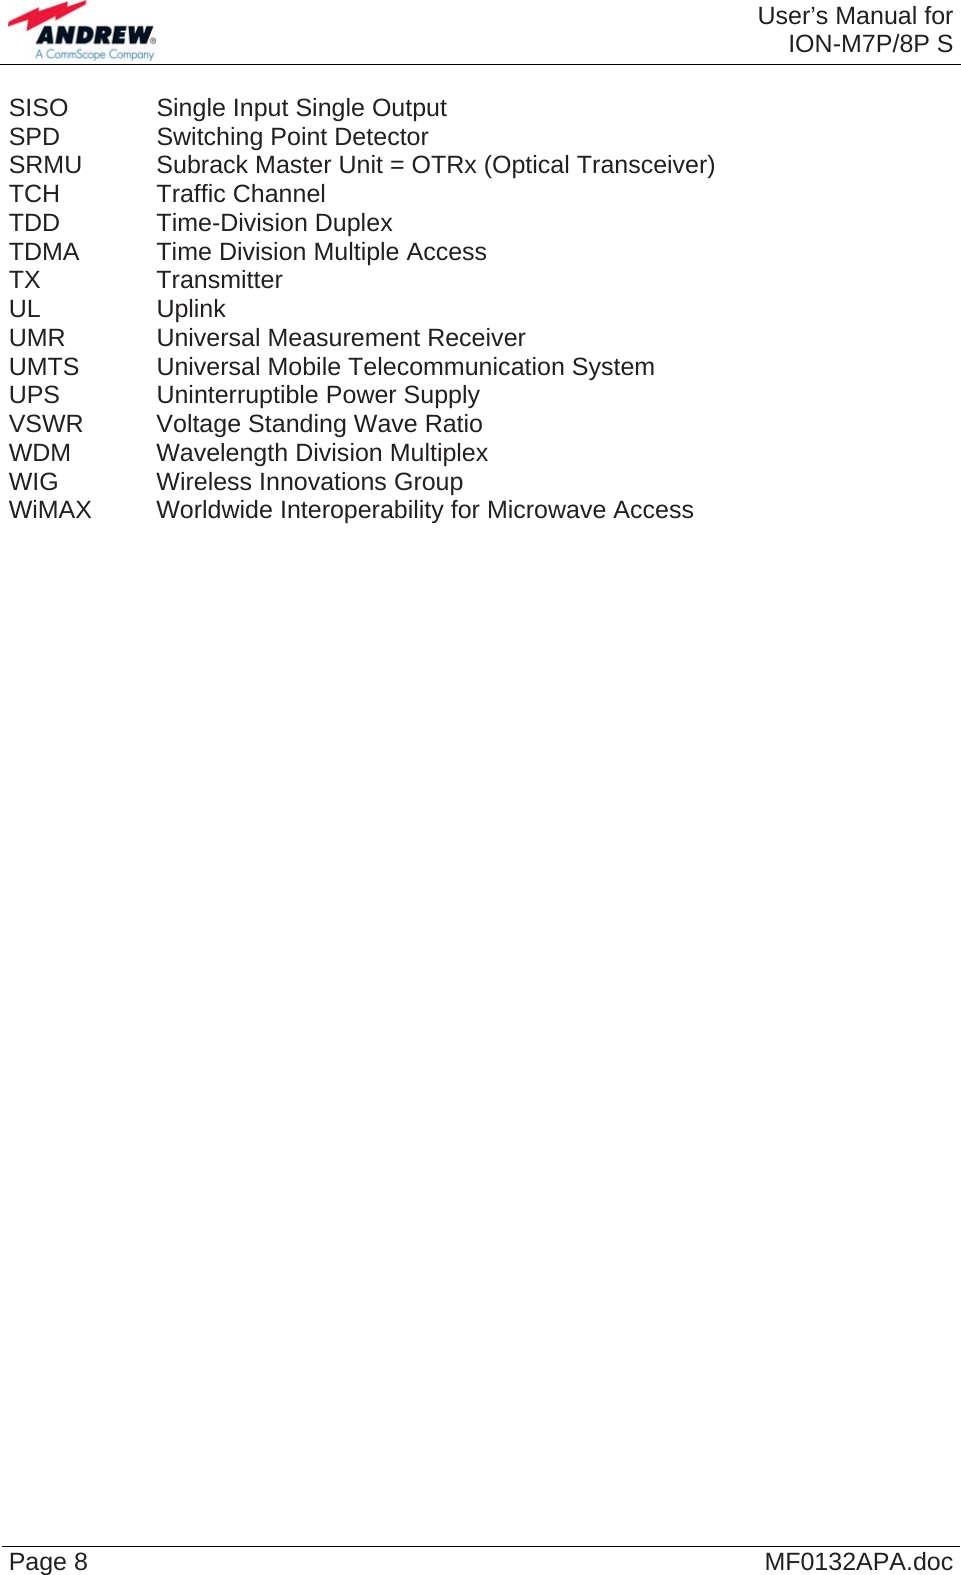  User’s Manual forION-M7P/8P S Page 8  MF0132APA.doc SISO    Single Input Single Output SPD    Switching Point Detector SRMU   Subrack Master Unit = OTRx (Optical Transceiver) TCH   Traffic Channel TDD   Time-Division Duplex TDMA   Time Division Multiple Access TX   Transmitter UL   Uplink UMR    Universal Measurement Receiver UMTS   Universal  Mobile Telecommunication System UPS    Uninterruptible Power Supply VSWR  Voltage Standing Wave Ratio WDM   Wavelength Division Multiplex WIG   Wireless Innovations Group WiMAX  Worldwide Interoperability for Microwave Access   